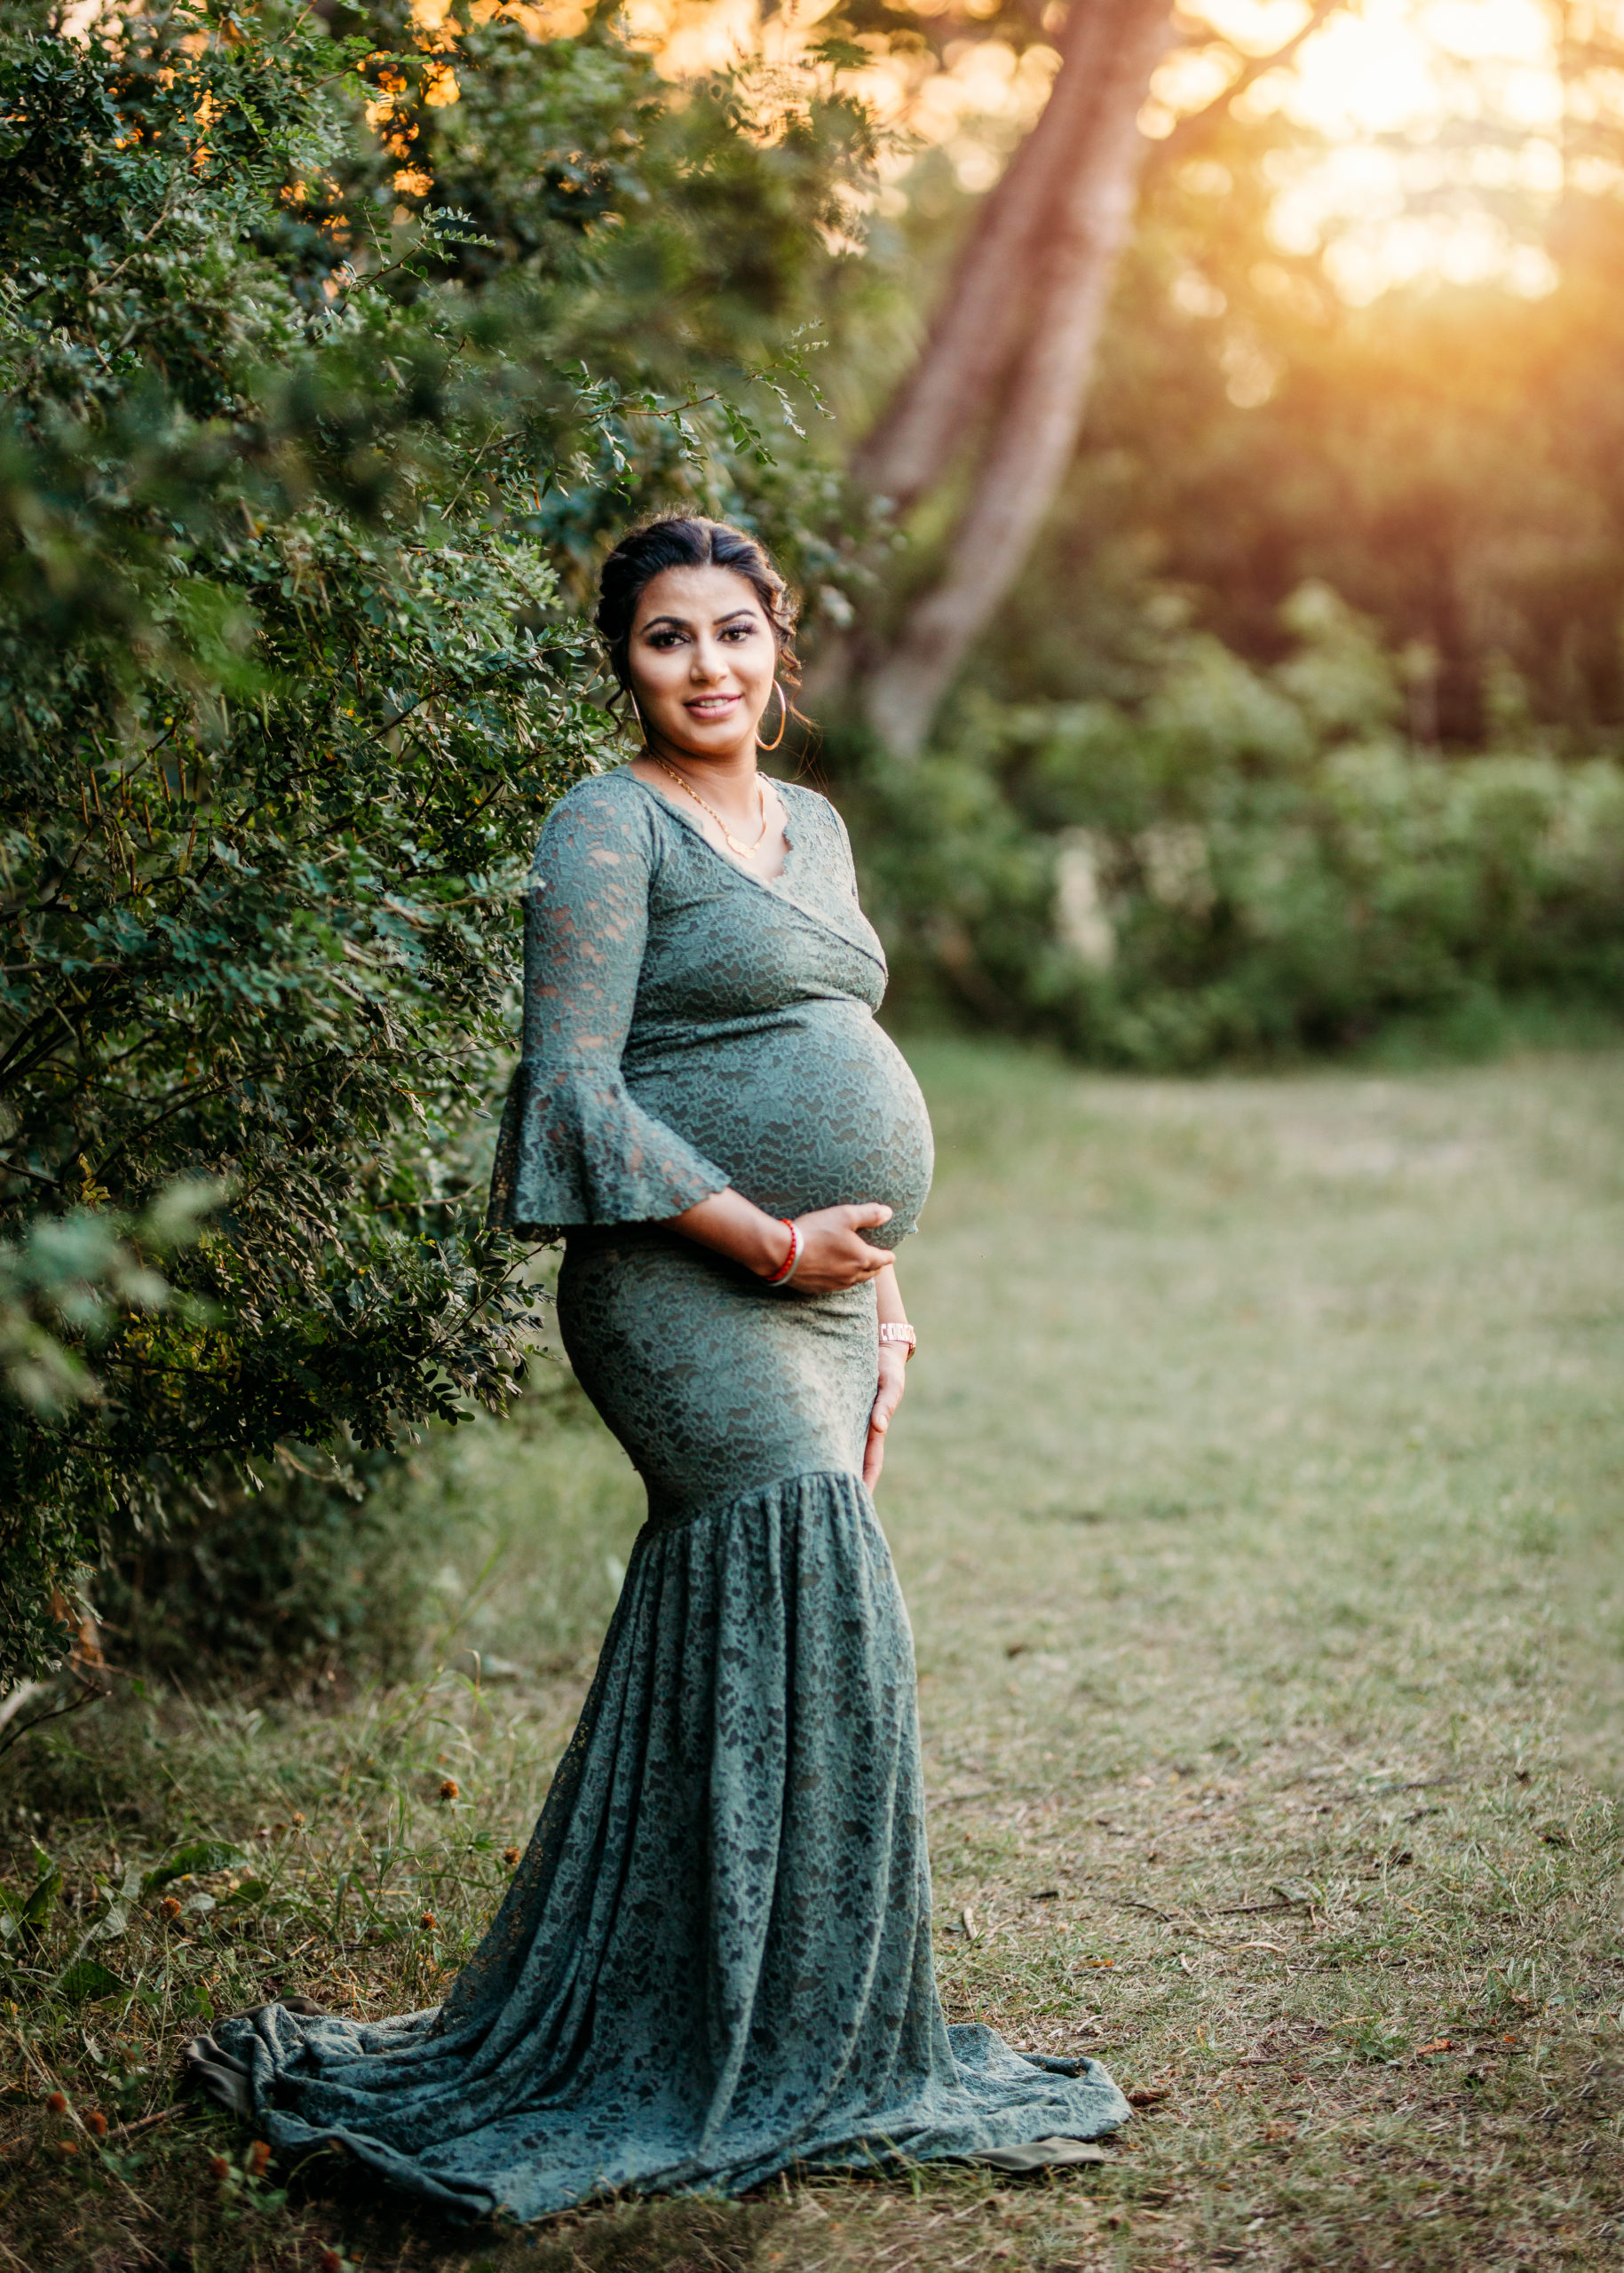 Maternity Photo of a beautiful mama to be in a green lace gown at sunset